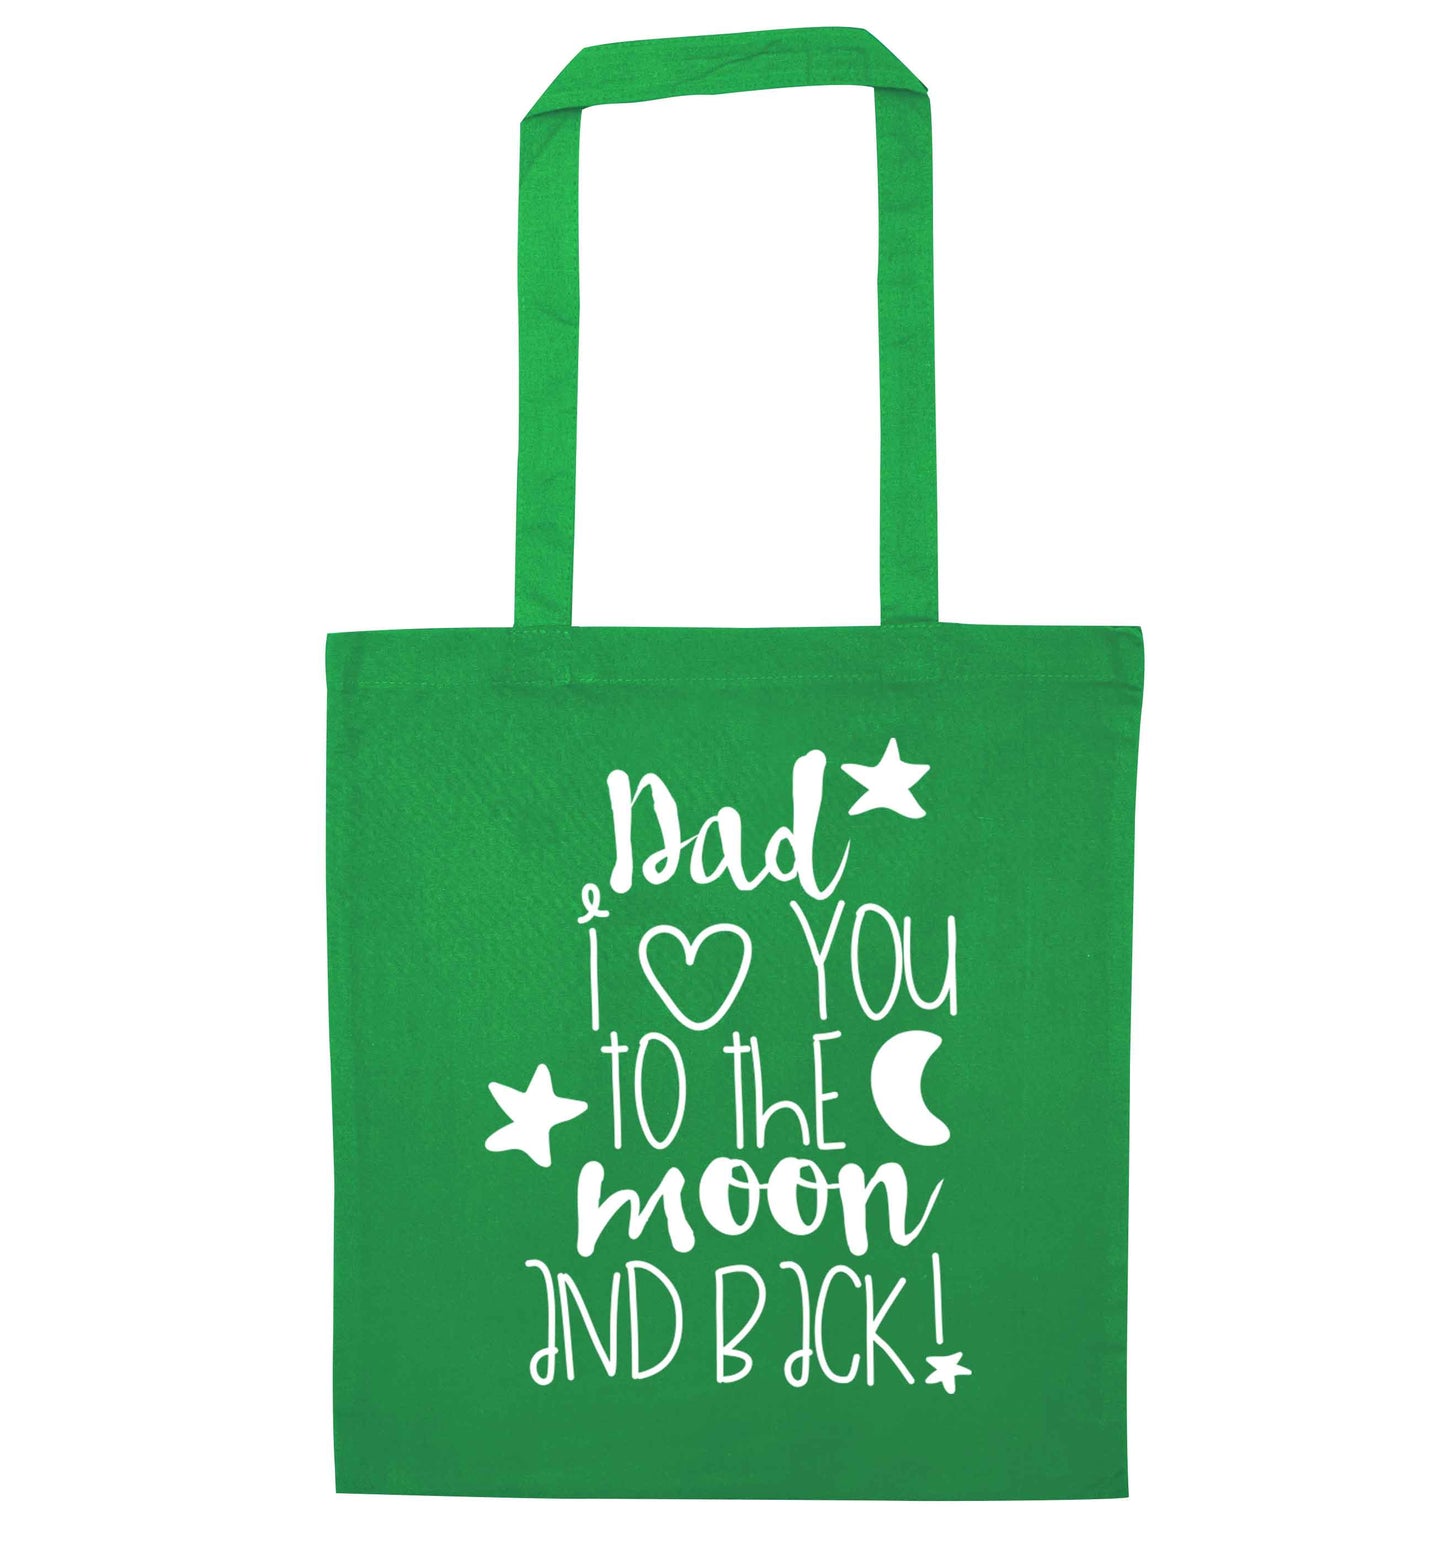 Dad I love you to the moon and back green tote bag